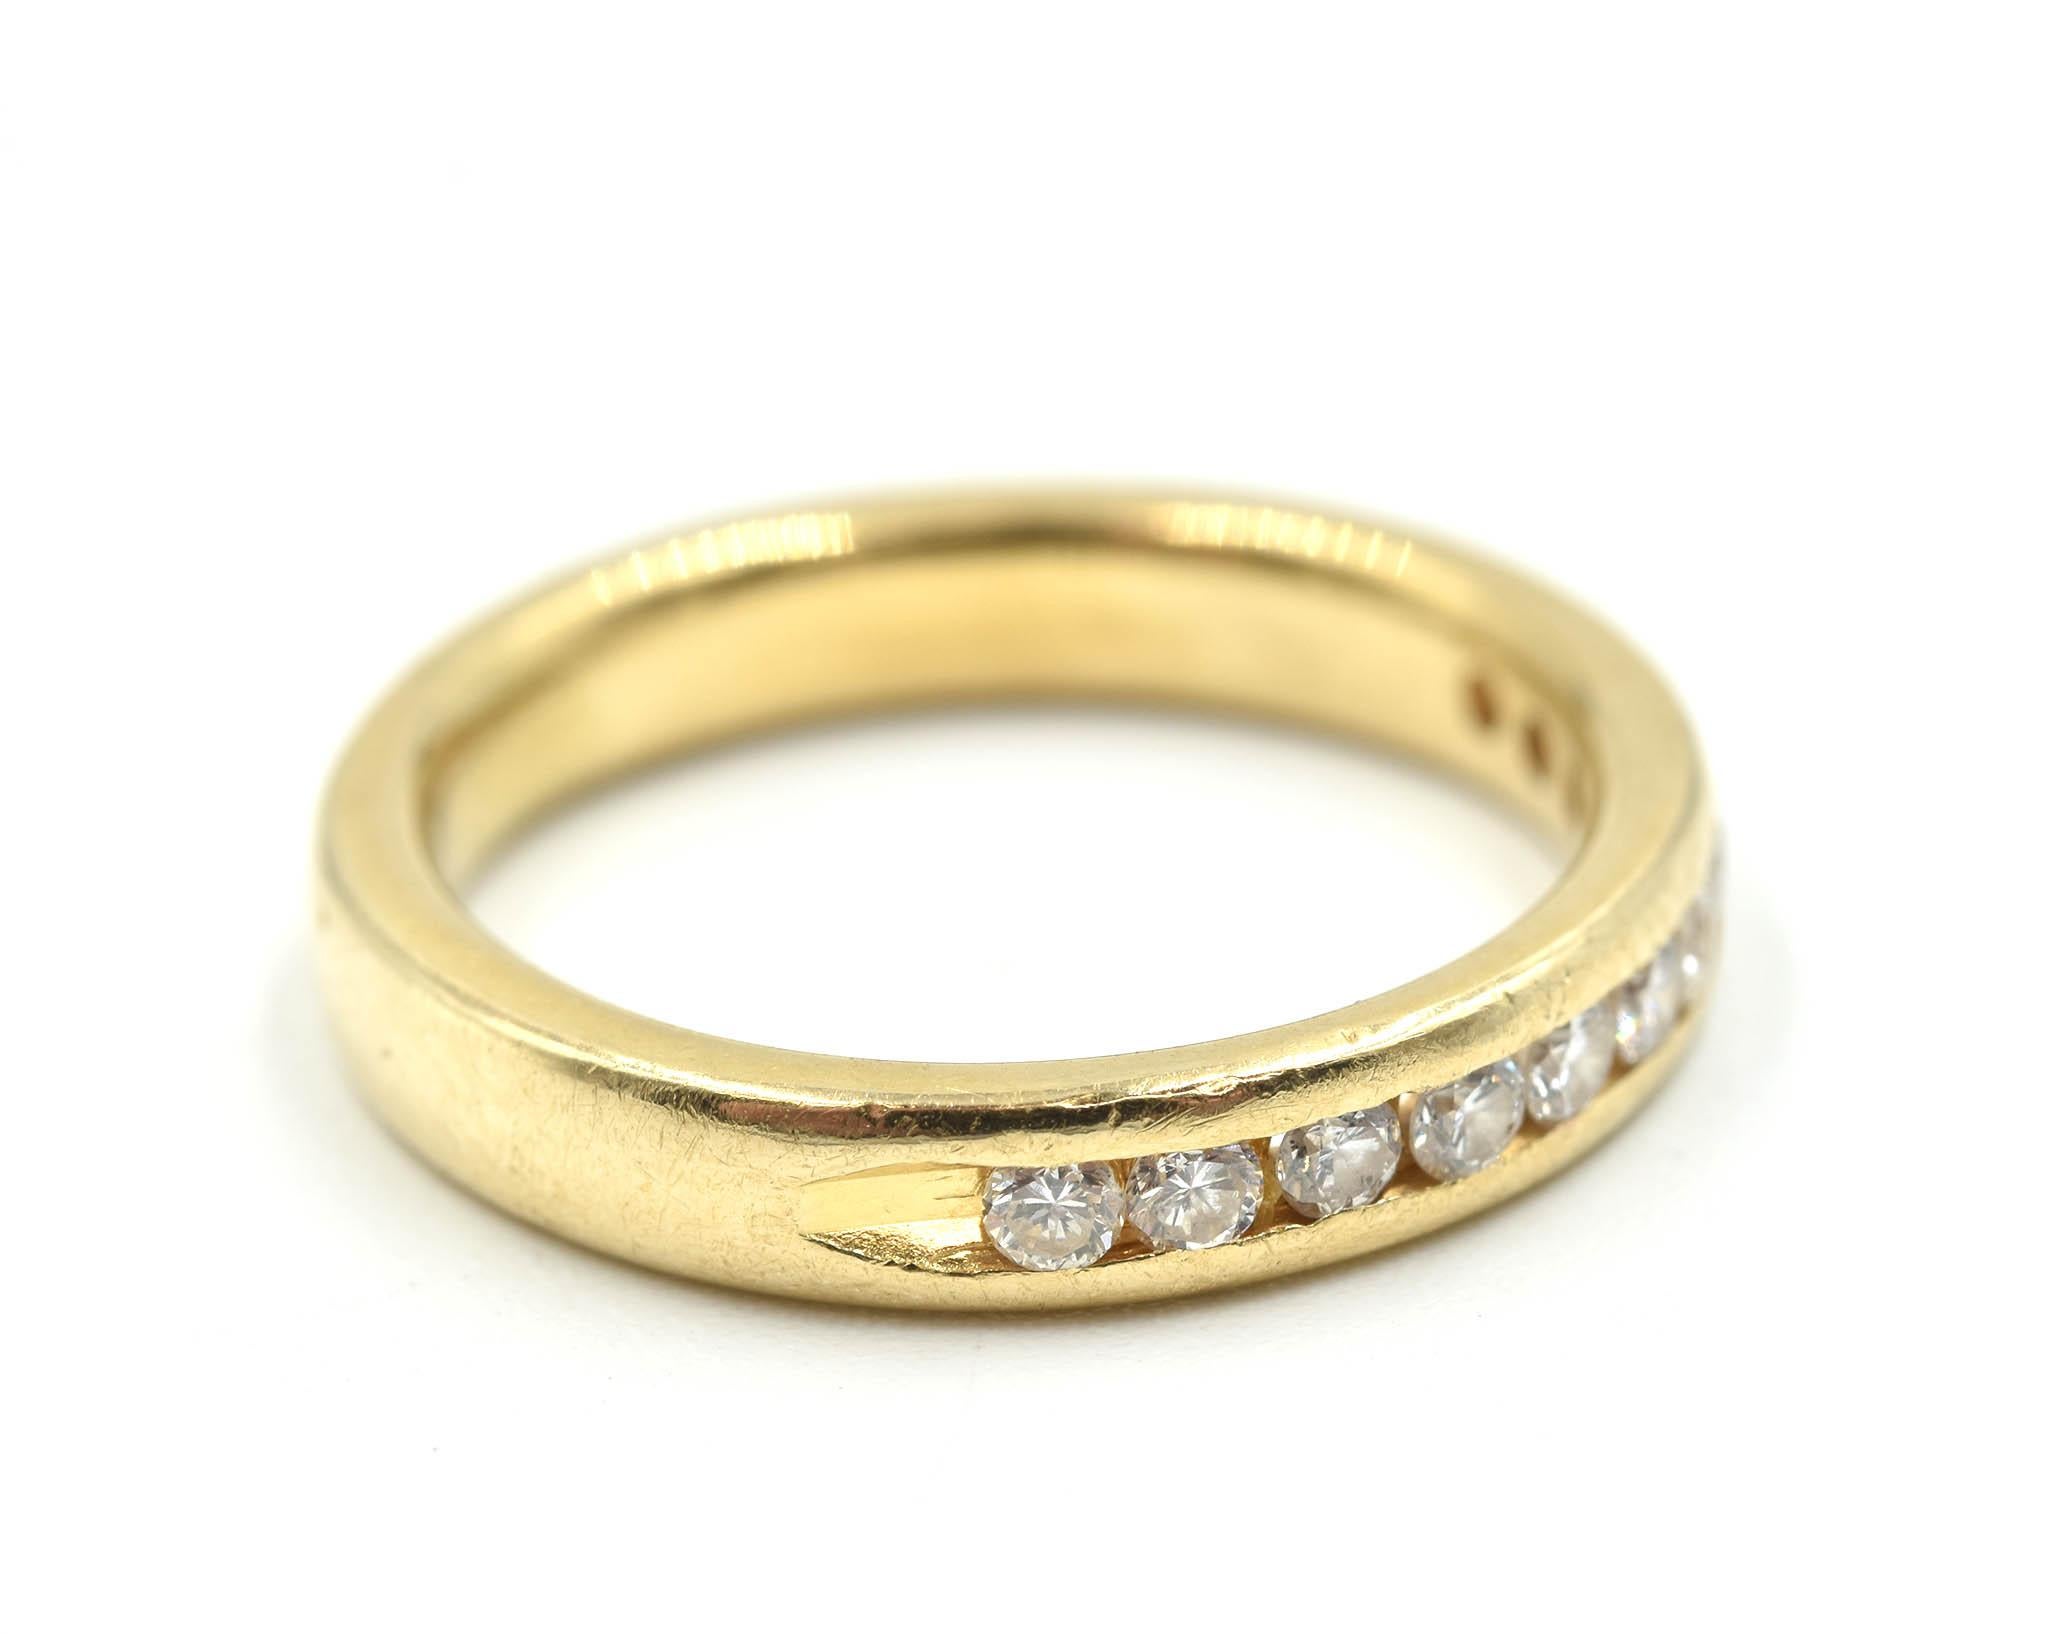 This classic band is made in 14k yellow gold and set with round diamonds. The diamonds have a total weight of 0.33 carats. The band weighs 3.00 grams. It is size 6.